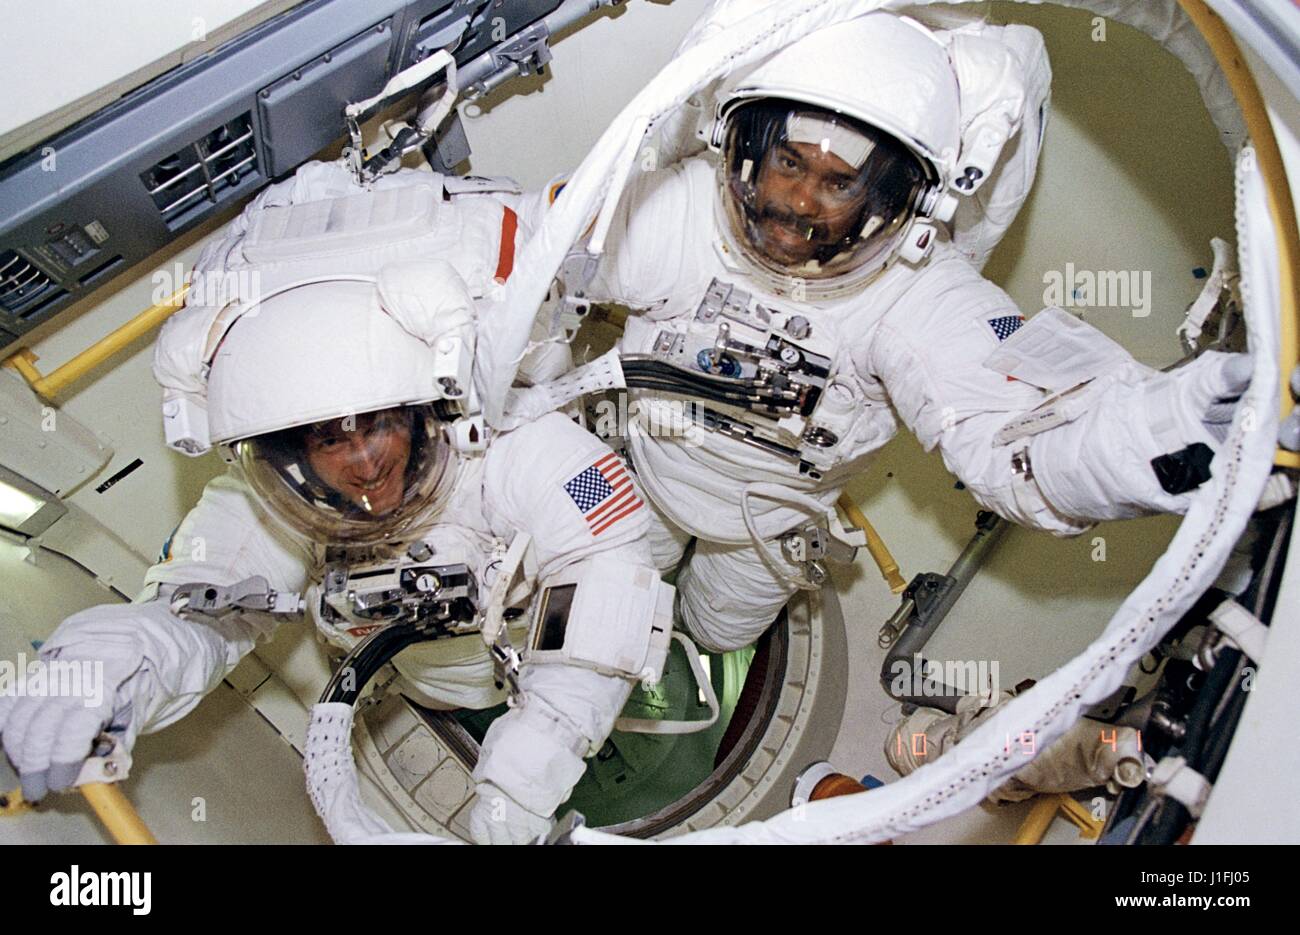 NASA STS-63 SPACEHAB-3 mission prime crew astronauts C. Michael Foale (left) and Bernard Harris, Jr. prepare to leave the space shuttle Discovery airlock for an extravehicular activity spacewalk February 9, 1995 in Earth orbit. During this spacewalk Harris became the first African-American to walk in space and Foale became the first British citizen to walk in space.      (photo by NASA Photo /NASA   via Planetpix) Stock Photo